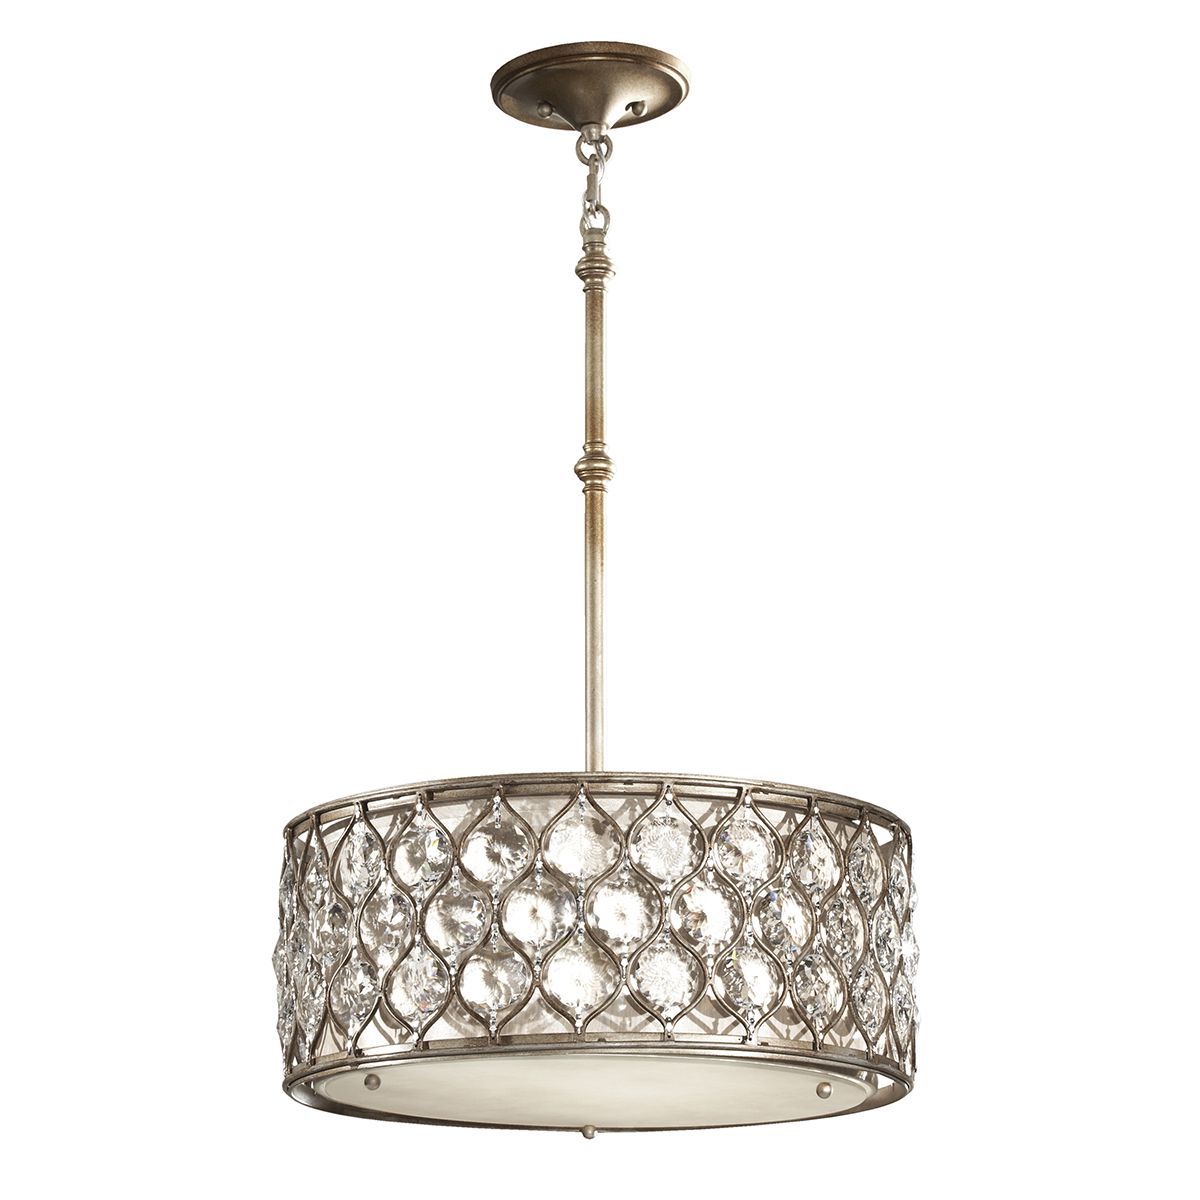 Preferred Burnished Silver 25 Inch Four Light Chandeliers Within Lucia 2 Light Pendant Chandelier In Burnished Silver With (View 5 of 15)